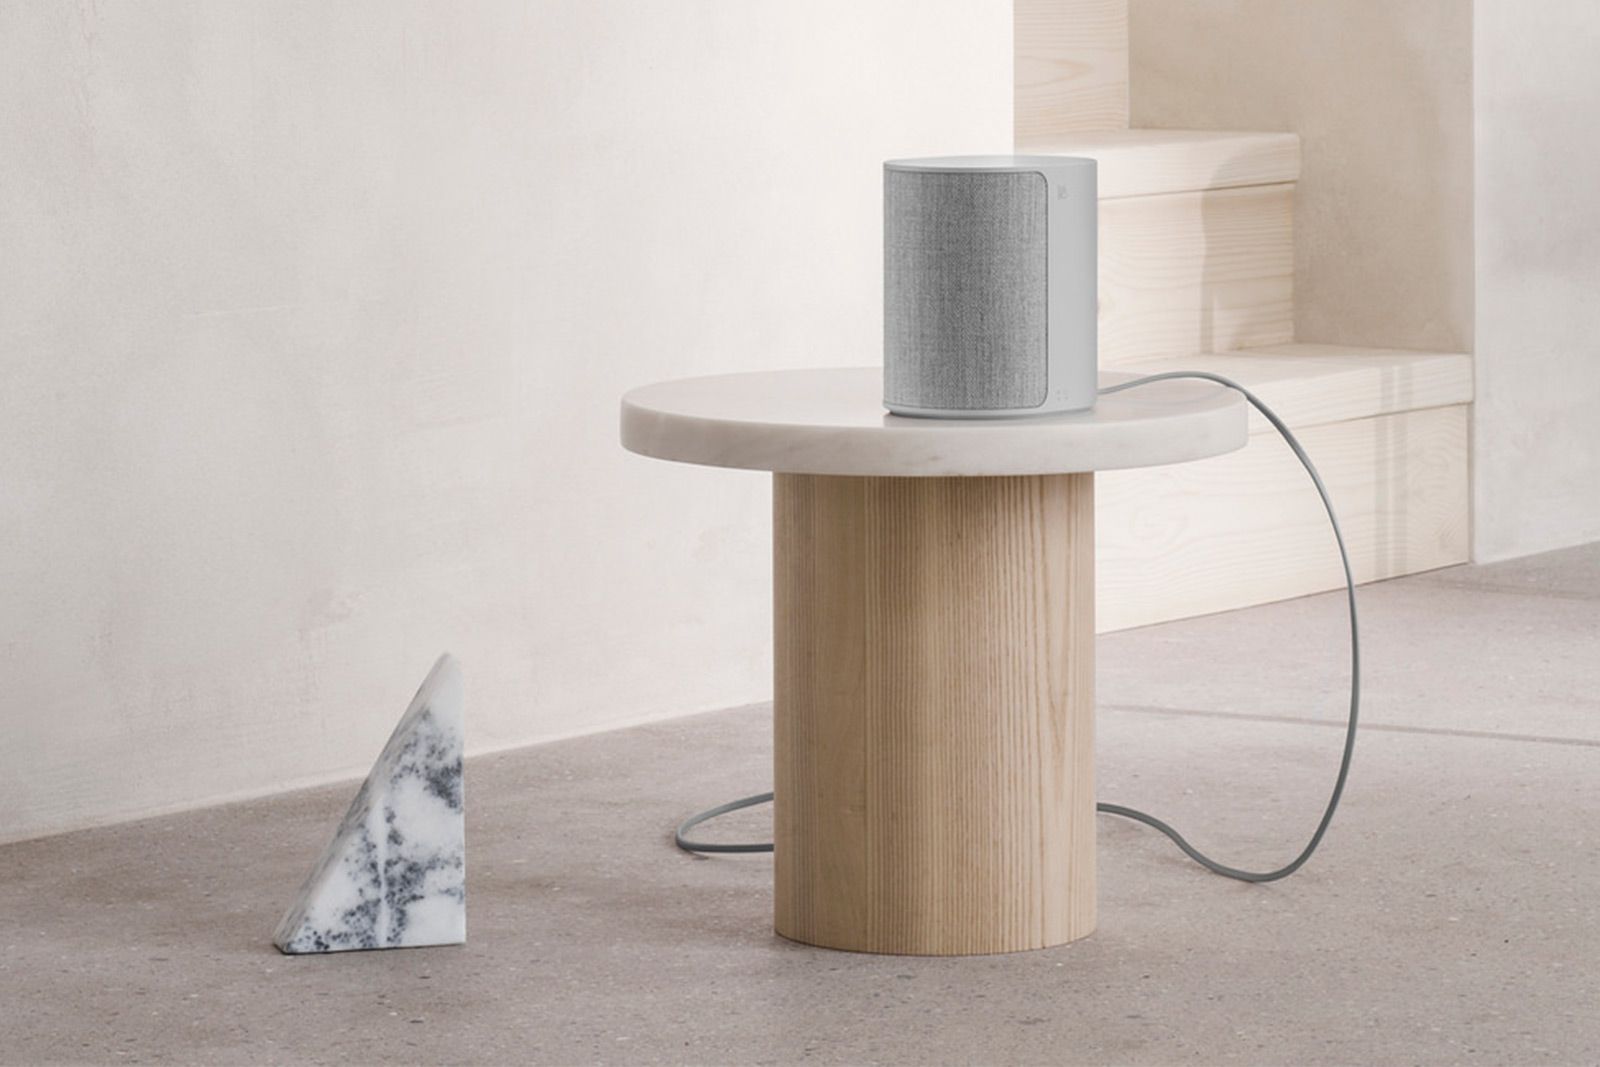 BO Play expands its multi-room speaker offering with Beoplay M3 image 1